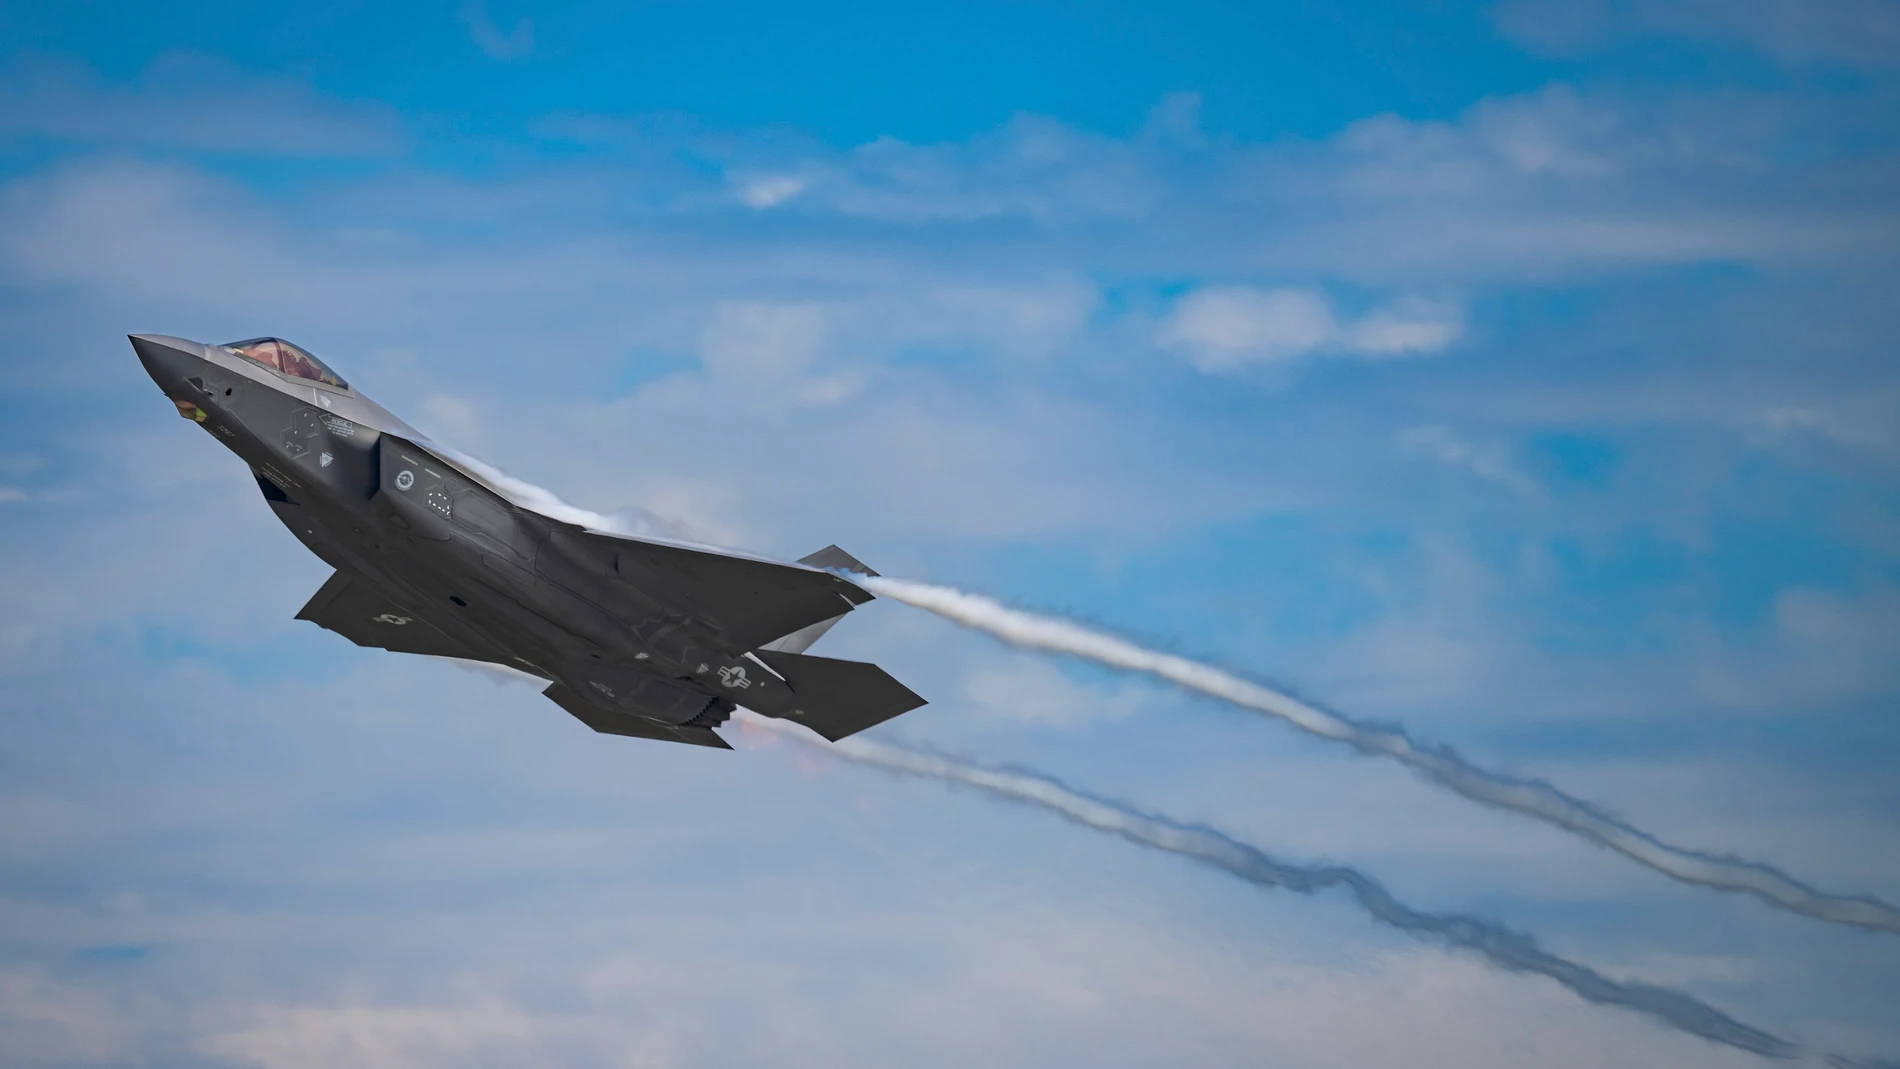 August 16, 2023, Point Mugu, CA, United States: A U.S Air Force F-35A Lightning II stealth fighter aircraft from the Green Bats of the 422nd Test and Evaluation Squadron, climbs out as it takes off from Naval Base Ventura County Point Mugu, August 16, 2023 in Point Mugu, California. (Foto de ARCHIVO) 16/08/2023